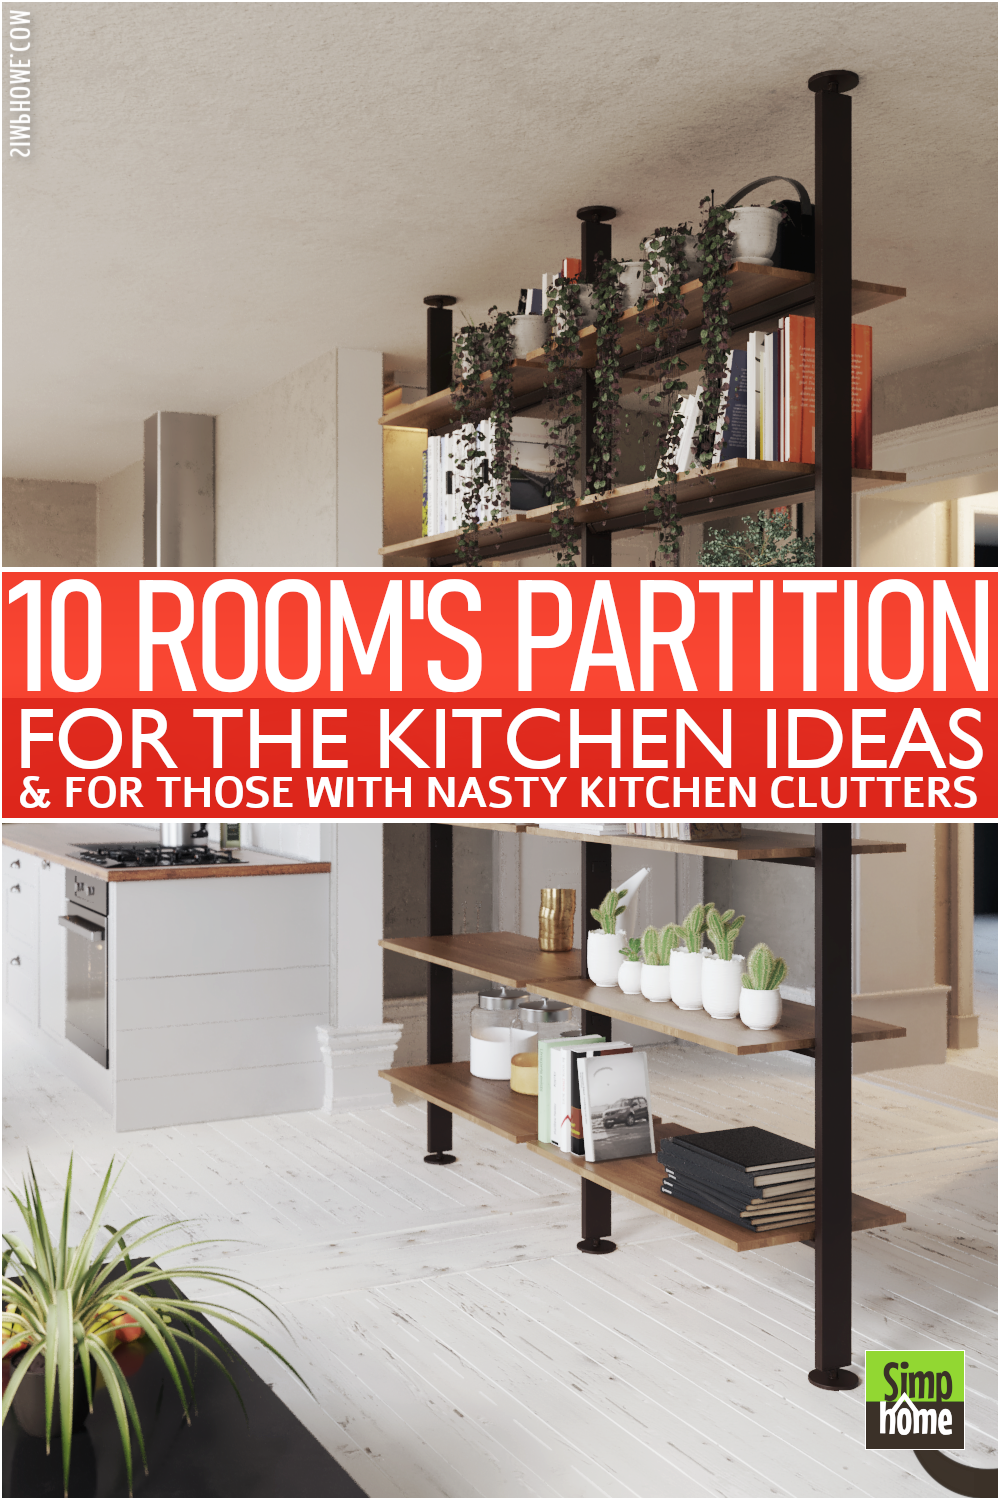 10 Kitchen Partitions with Storage poster